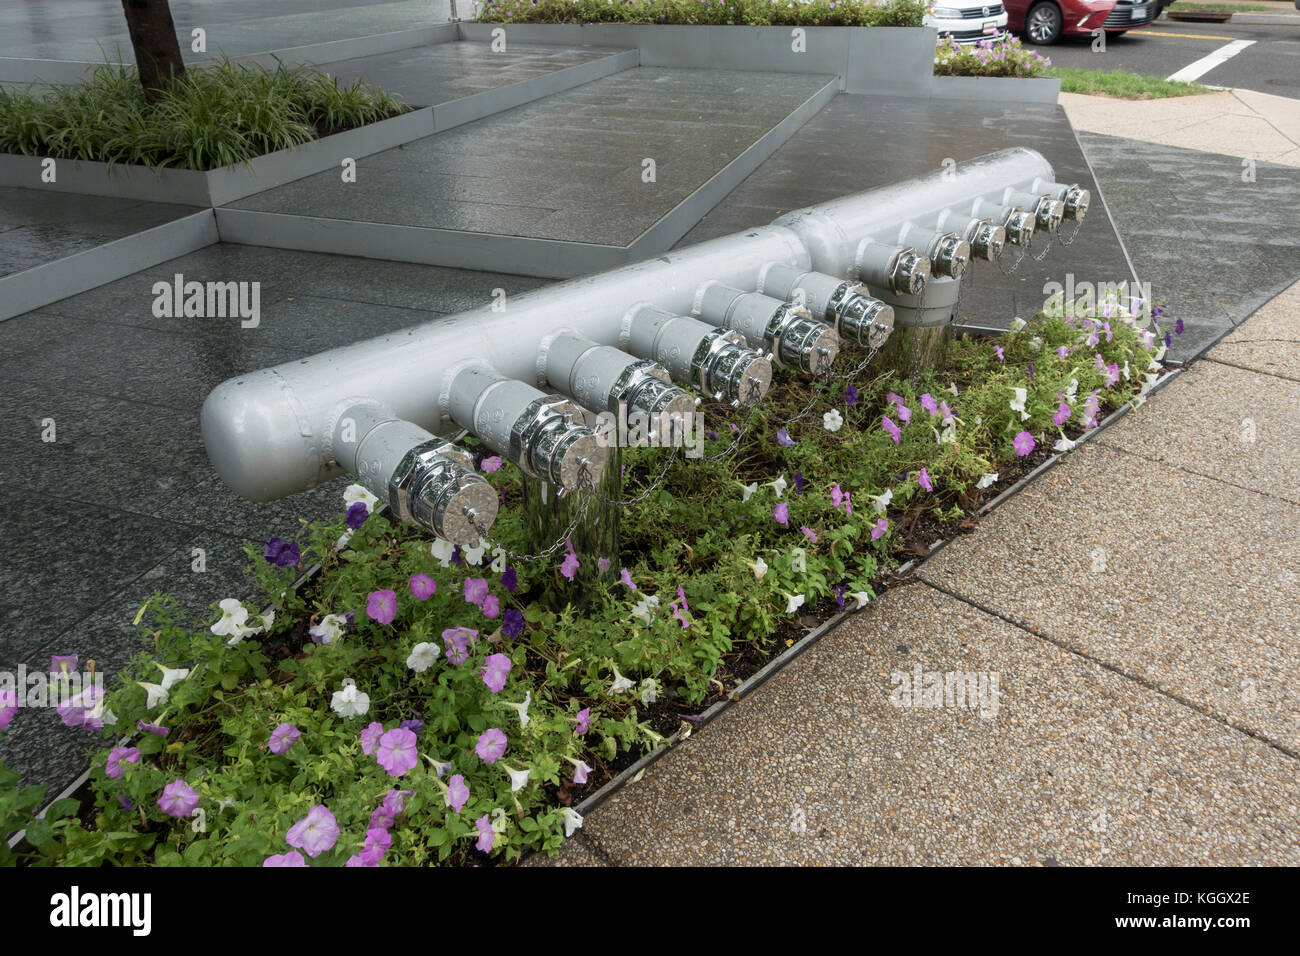 A line of dry standpipes/risers inlet pipes outside a hotel in Washington DC, United States. Stock Photo